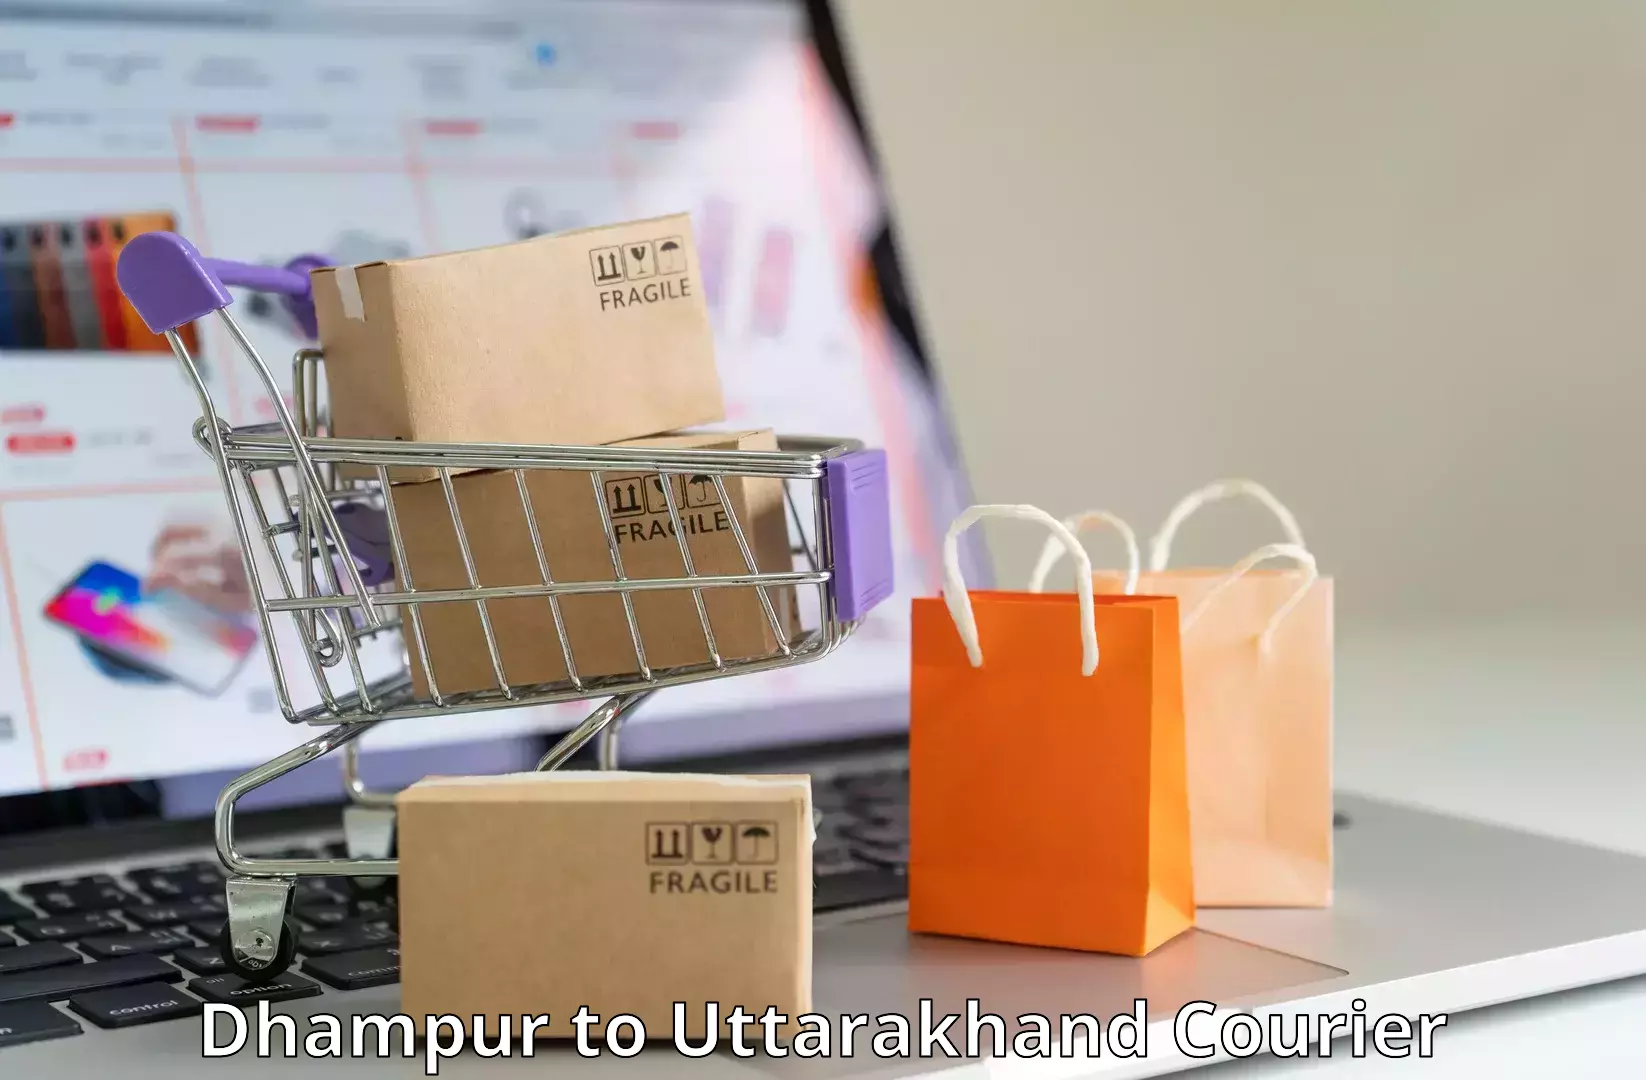 Cost-effective courier options Dhampur to Dehradun